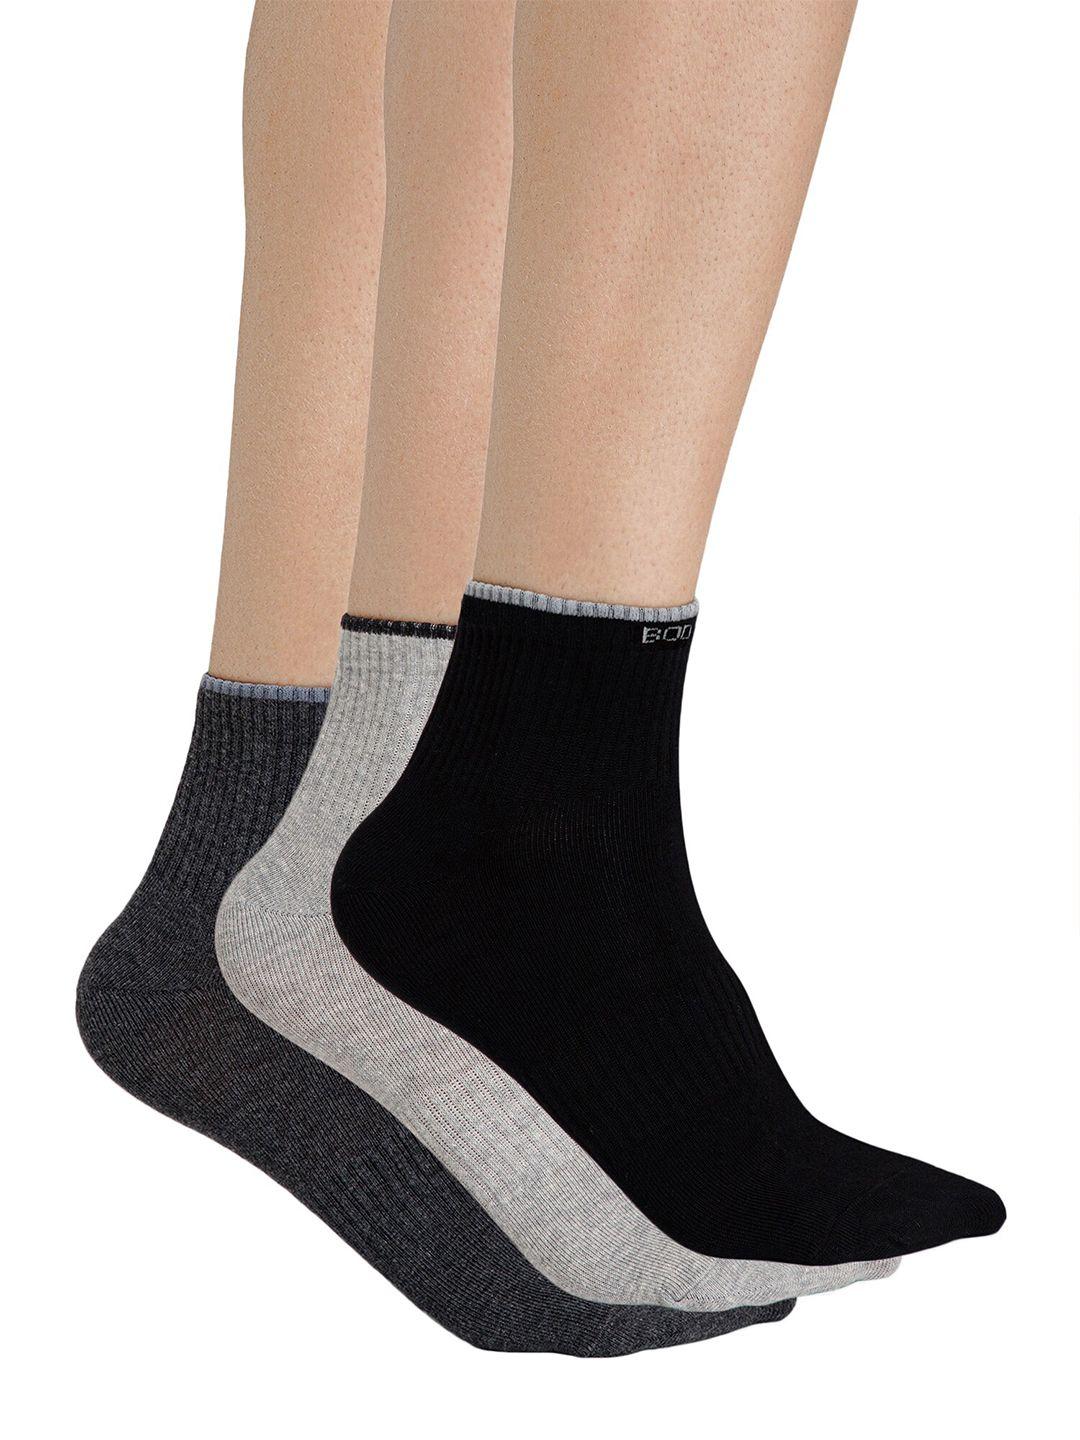 bodycare men pack of 3 assorted cotton above ankle length socks